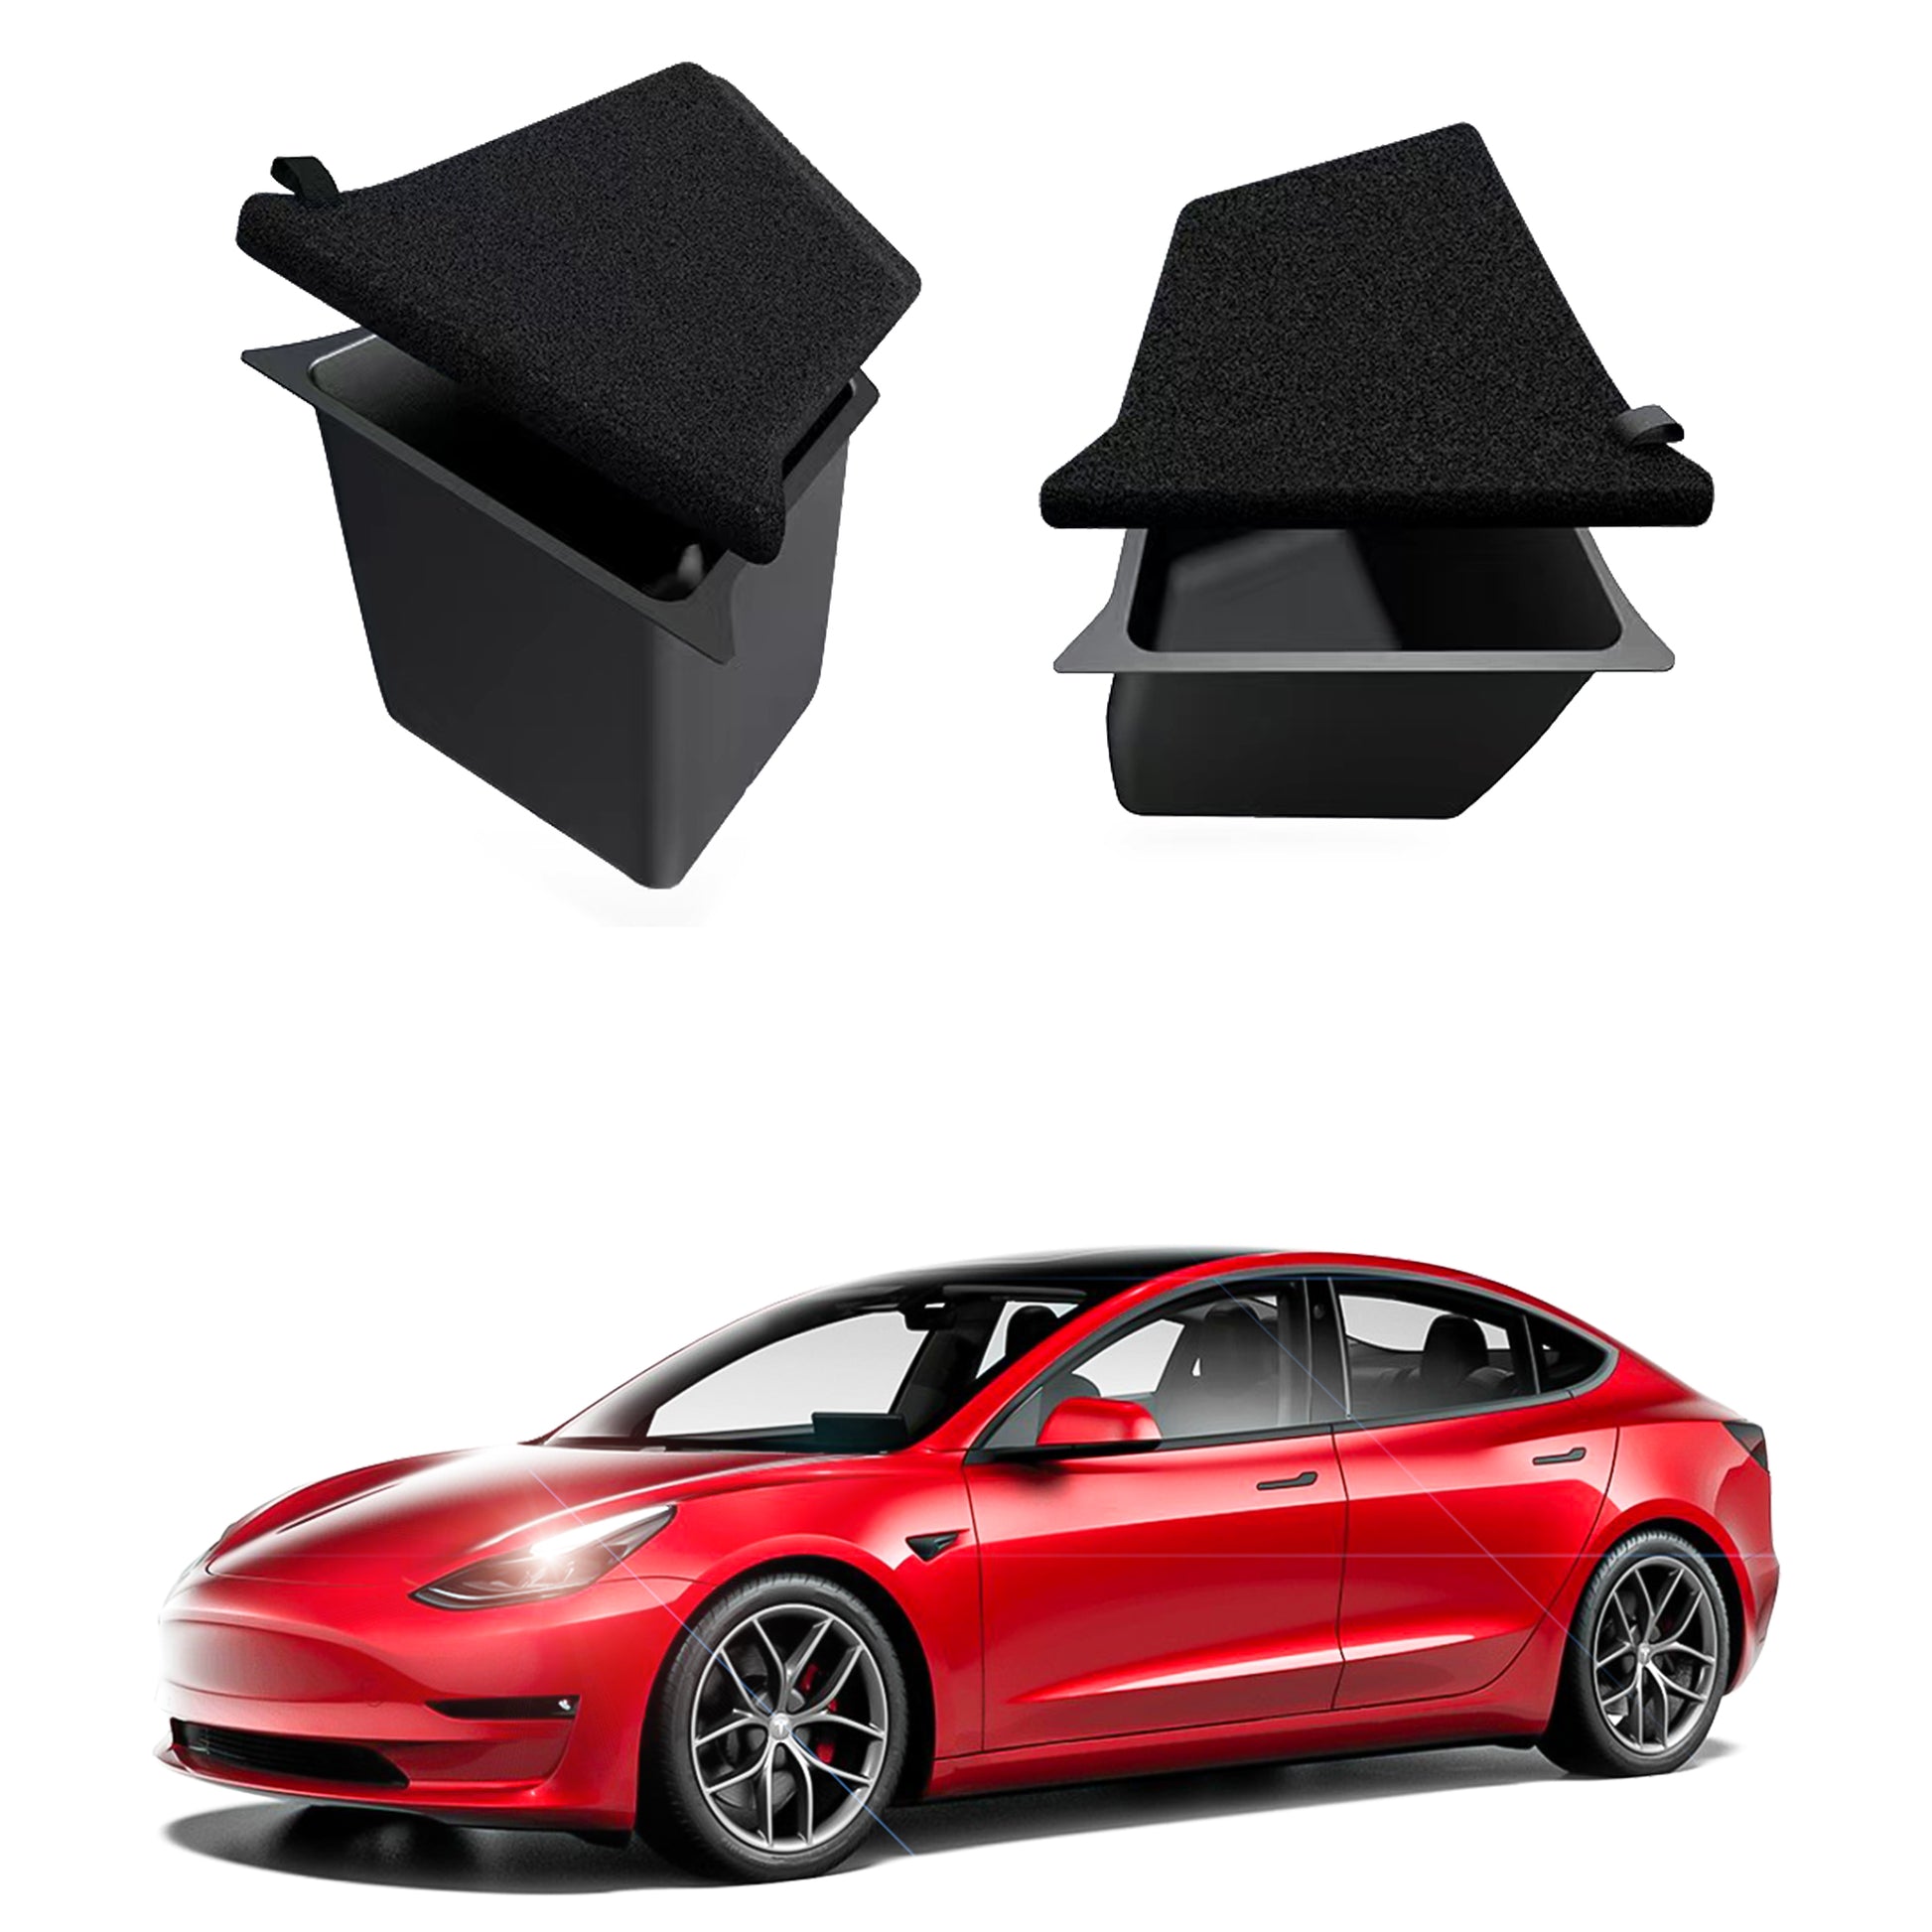 Tesla Model Y Rear Trunk Side Organizer Sorting Bins expands space in the cargo area, prevents items from rolling out of deep grooves High quality TPE material to reduce collisions and protect the items in the box